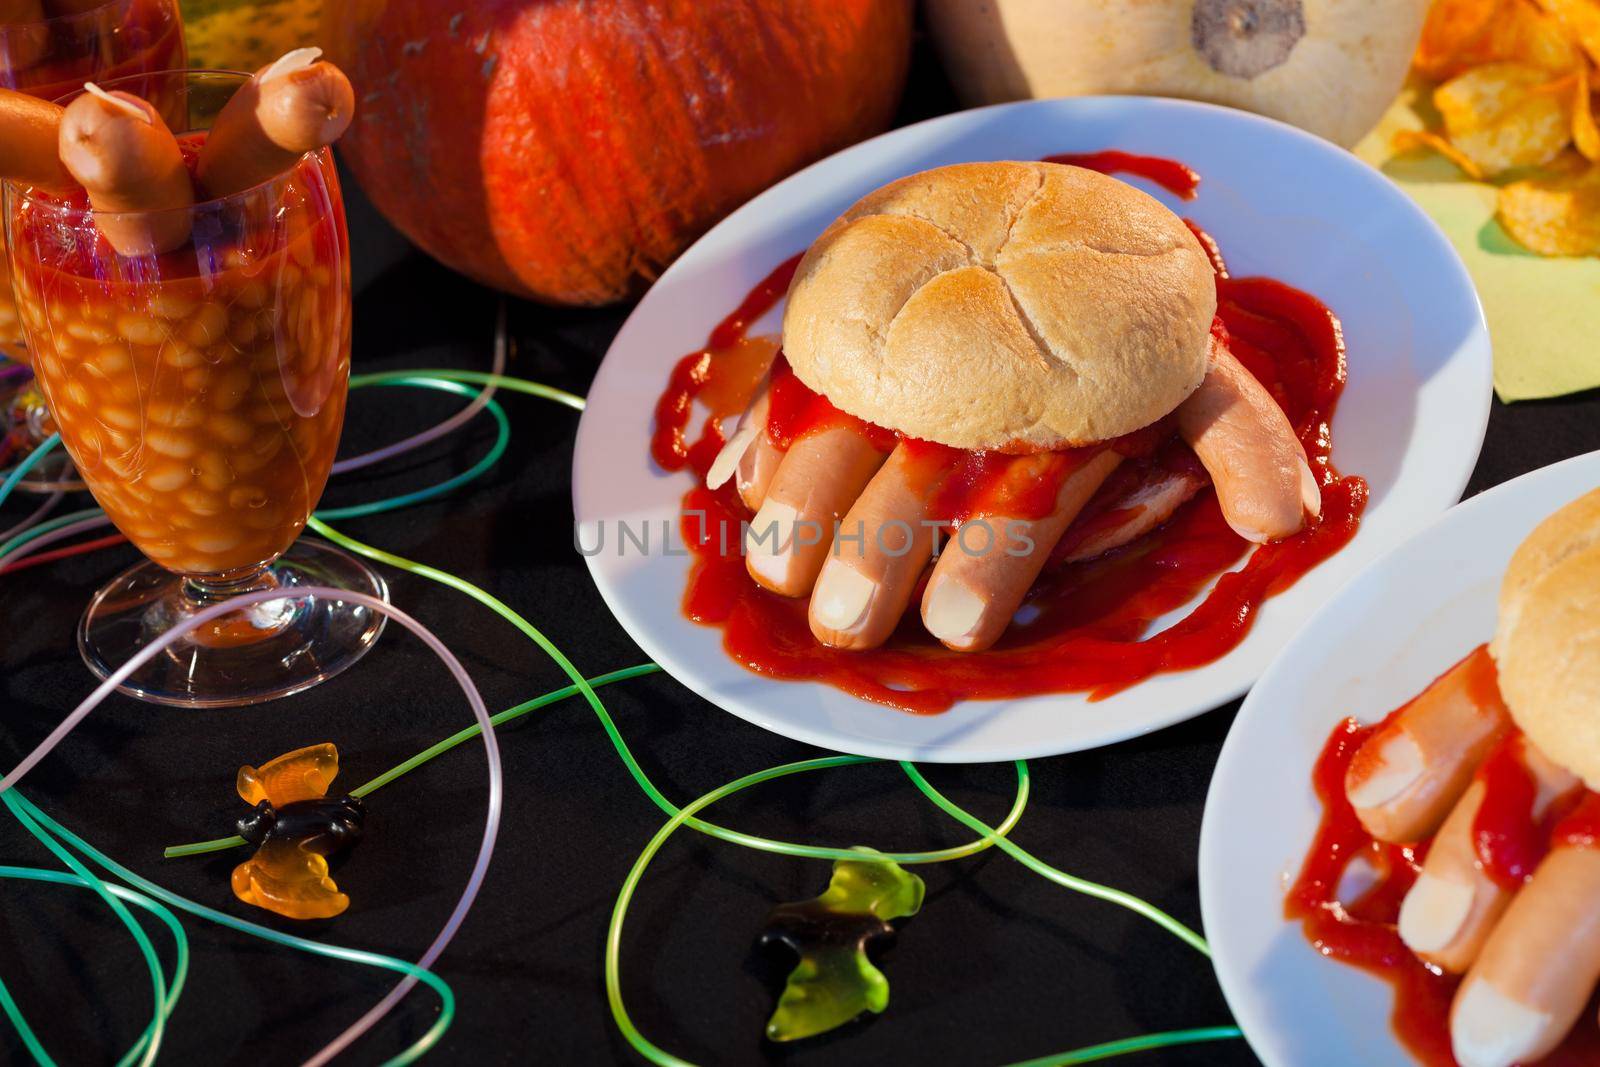 Hot dog in shape of human hand kept in burger with sausage as blood for halloween